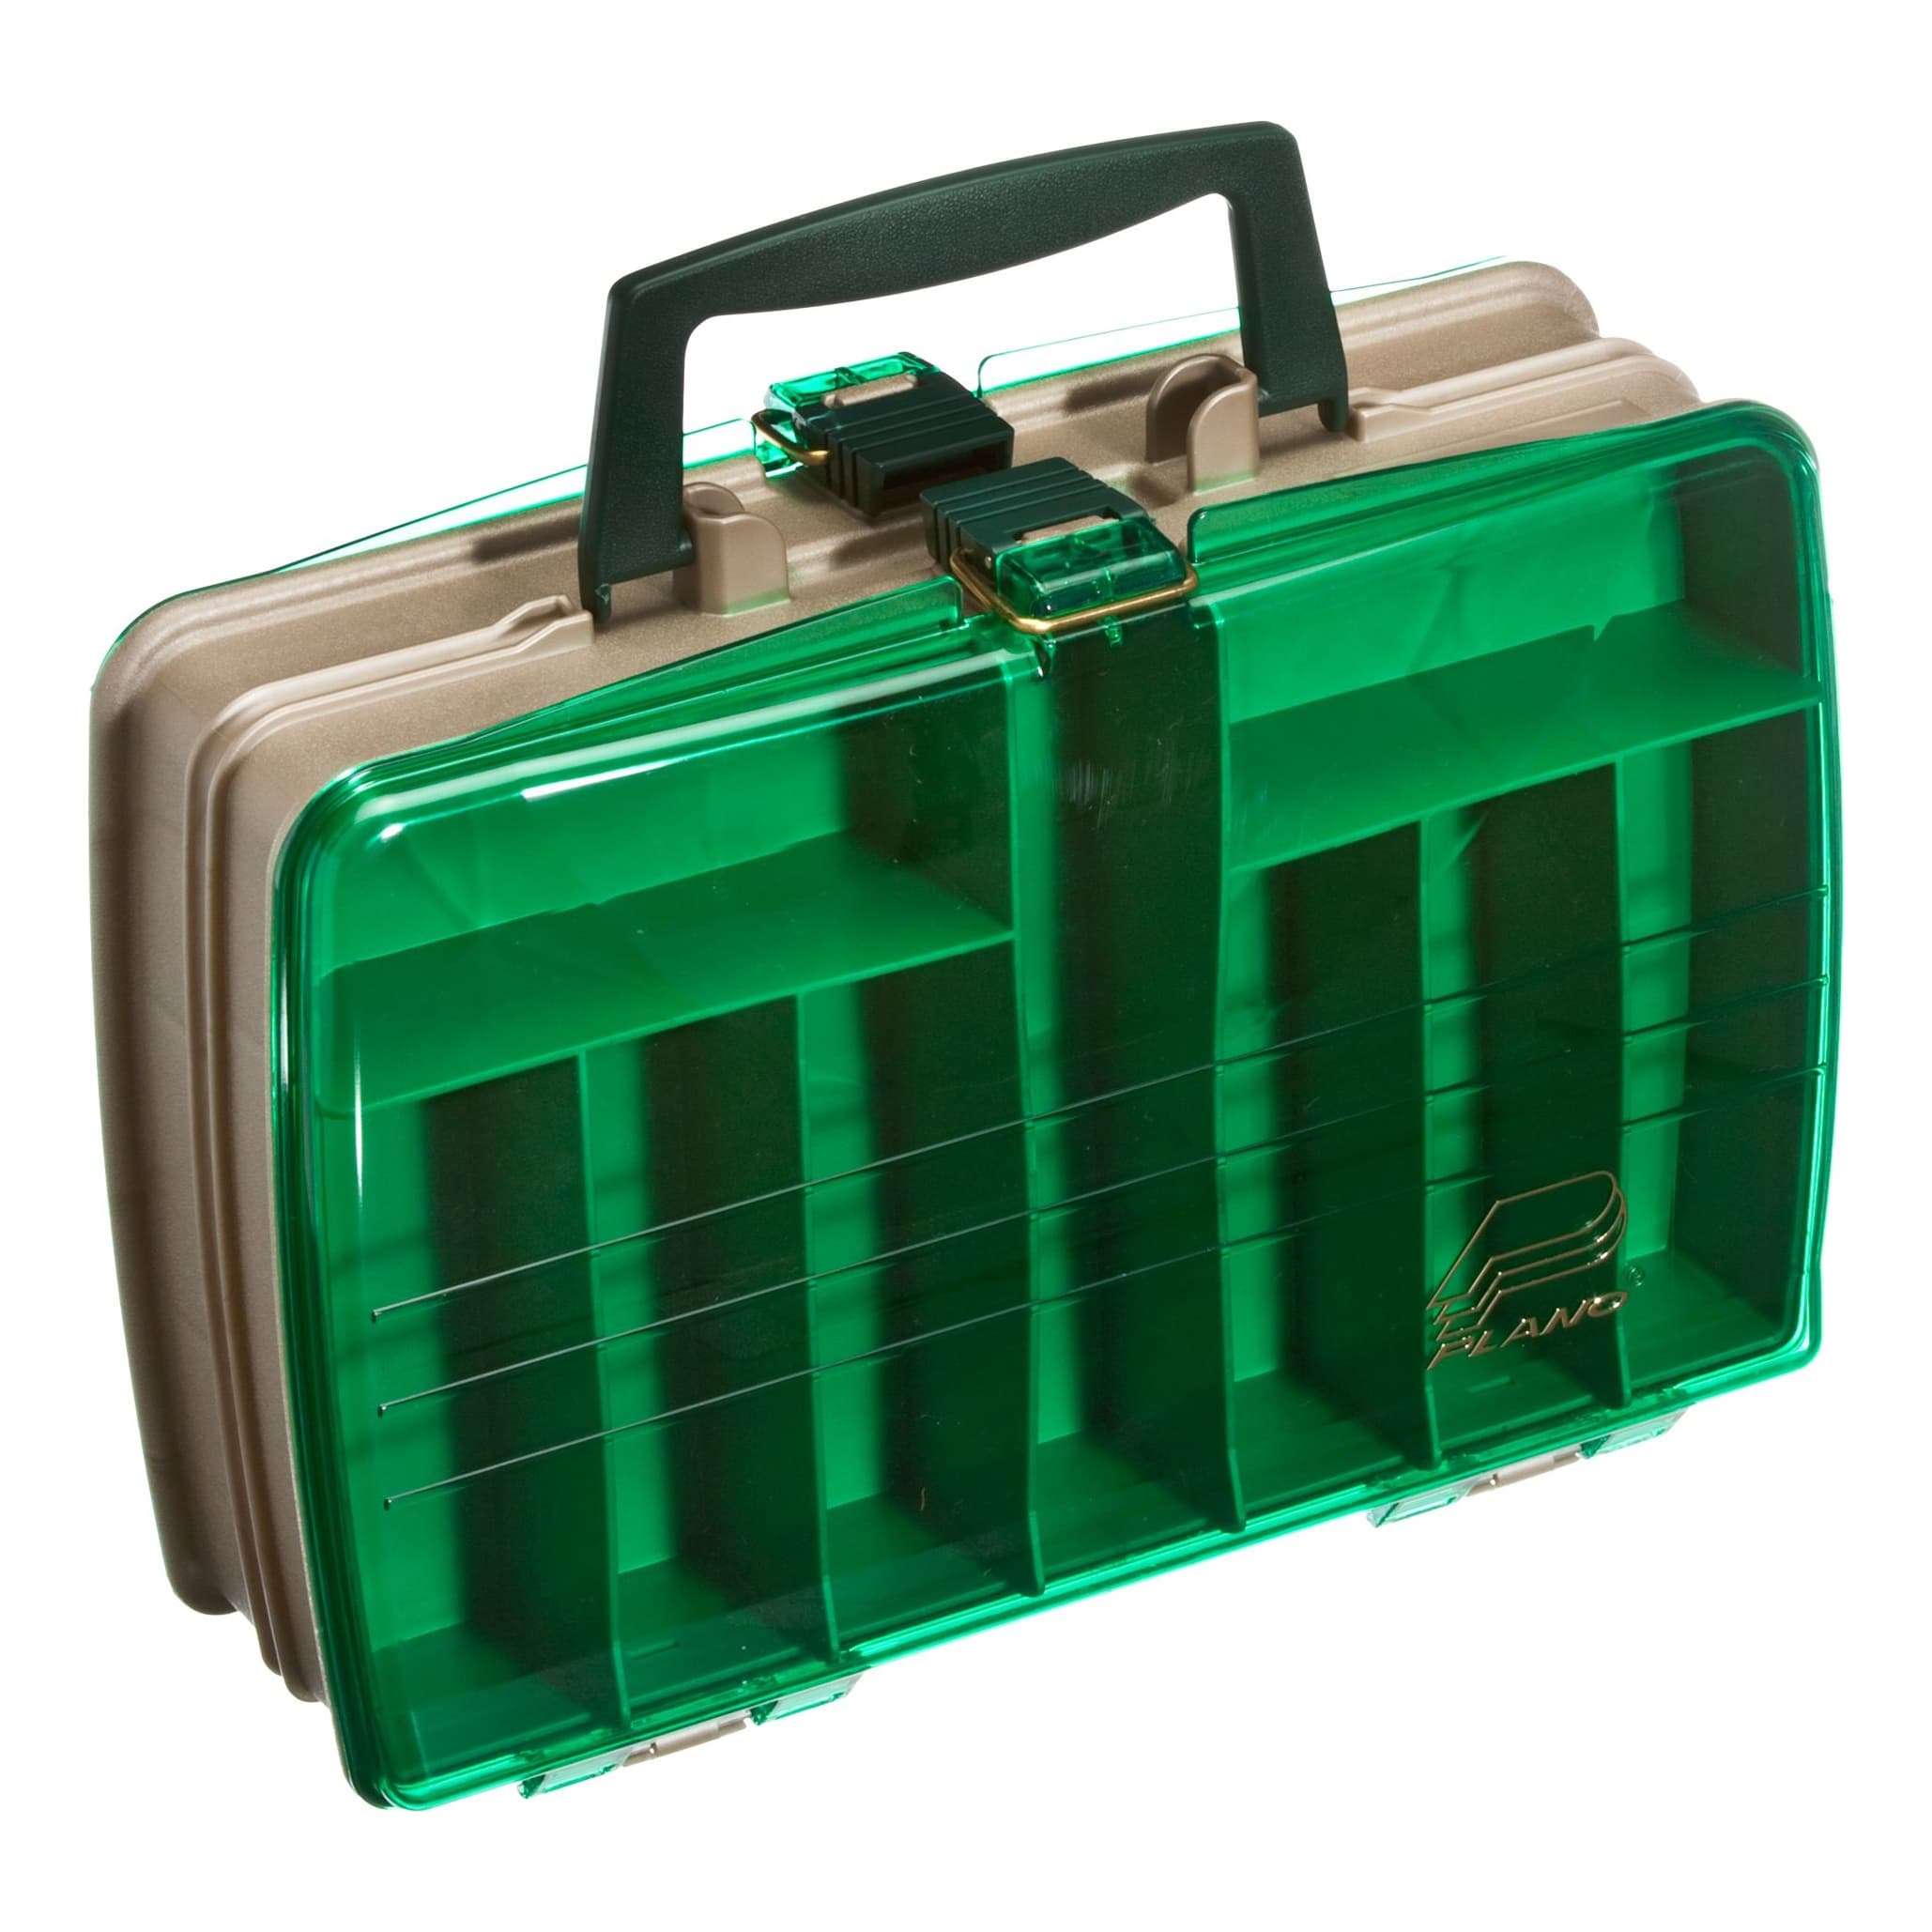 Plano® 1155 Two-Level Satchel Tackle Box